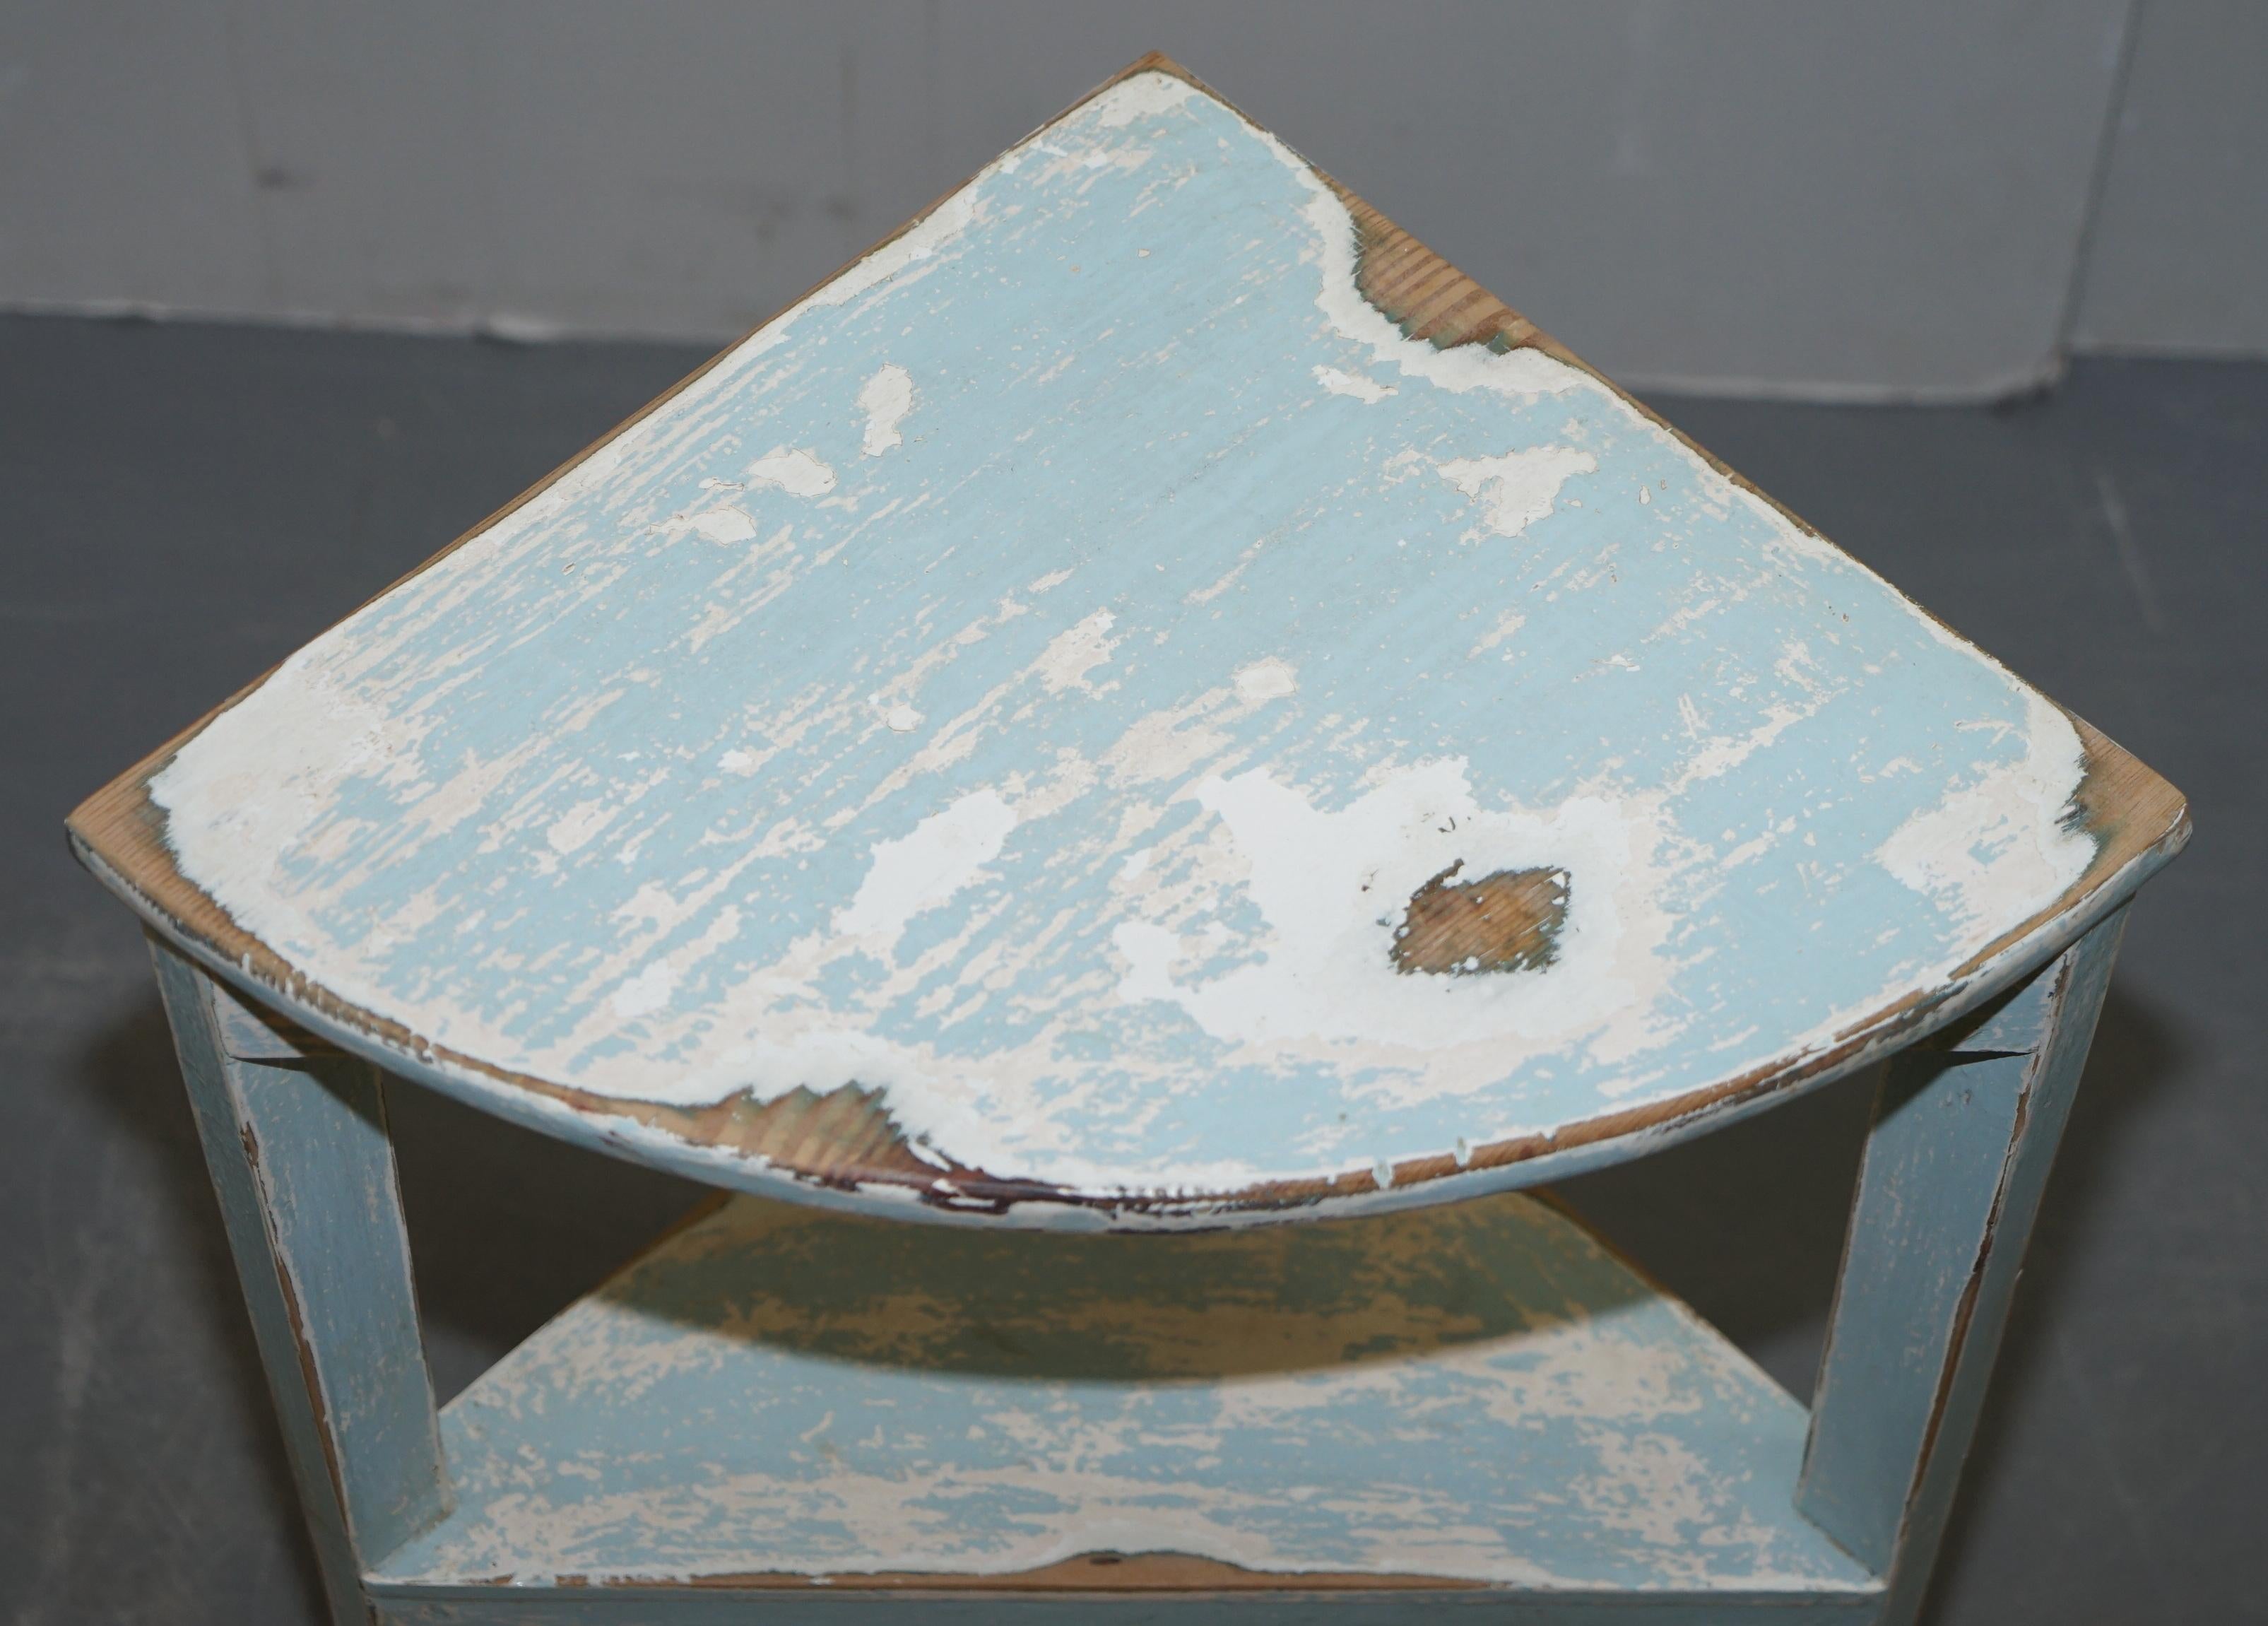 We are delighted to offer for sale this lovely white eggshell blue painted distressed corner plant stand, bookshelf.

A very good looking well made and decorative corner unit, ideally suited with a plant on top and something decorative